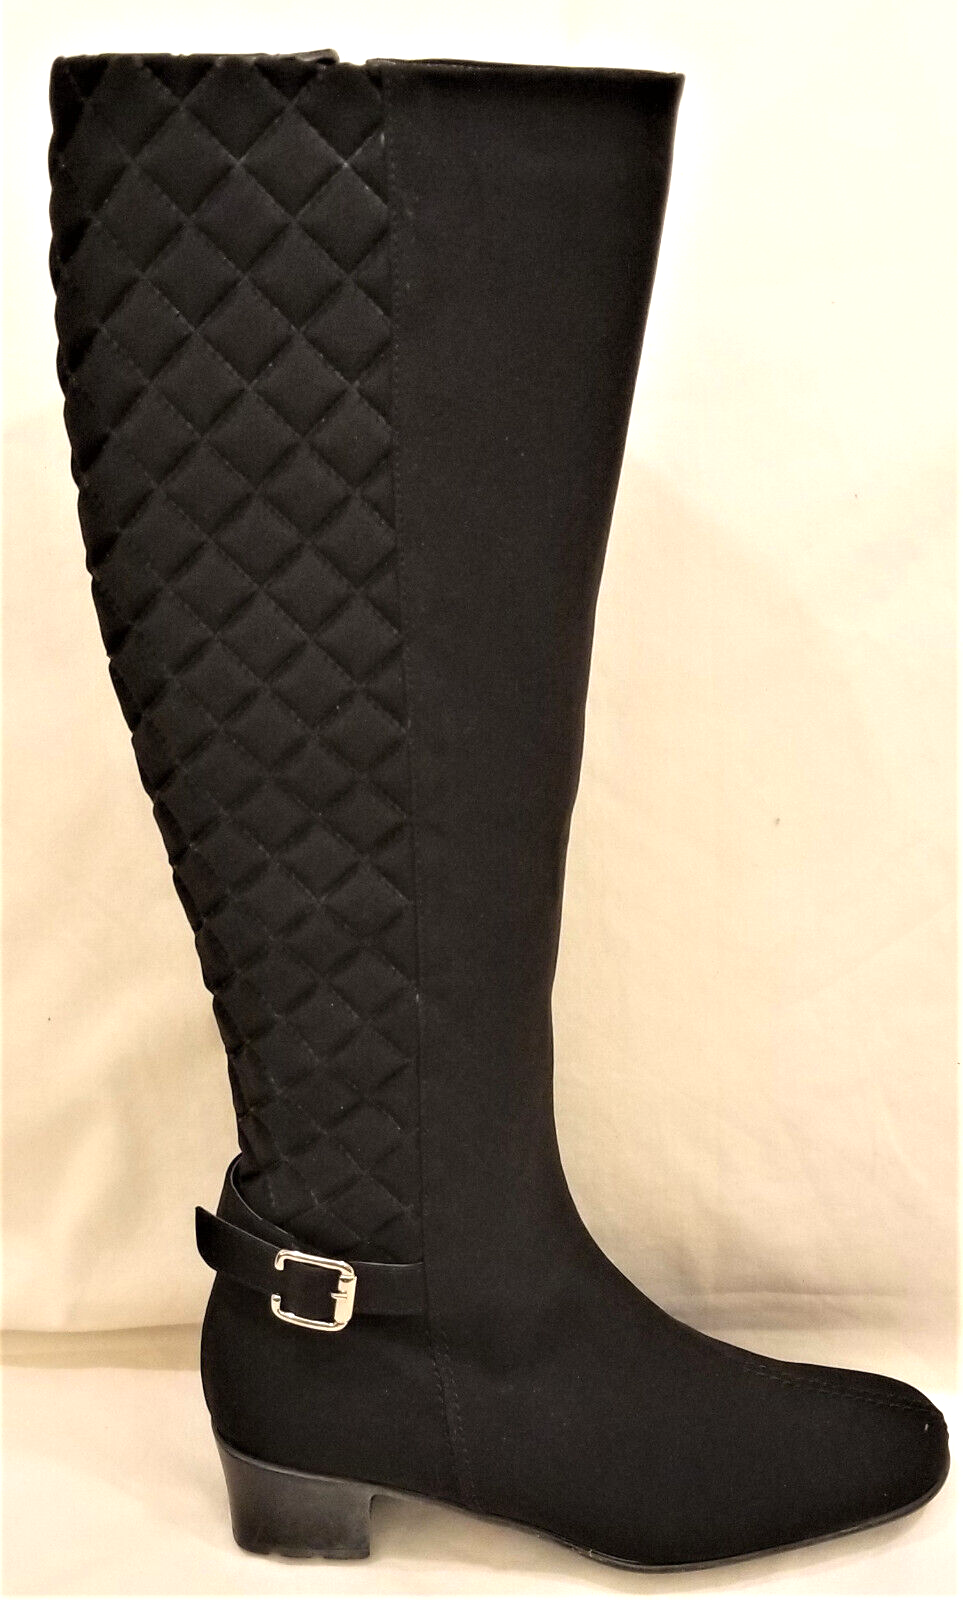 Primary image for Sesto Meucci Knee High Waterproof Riding Boots Sz-7.5M Black